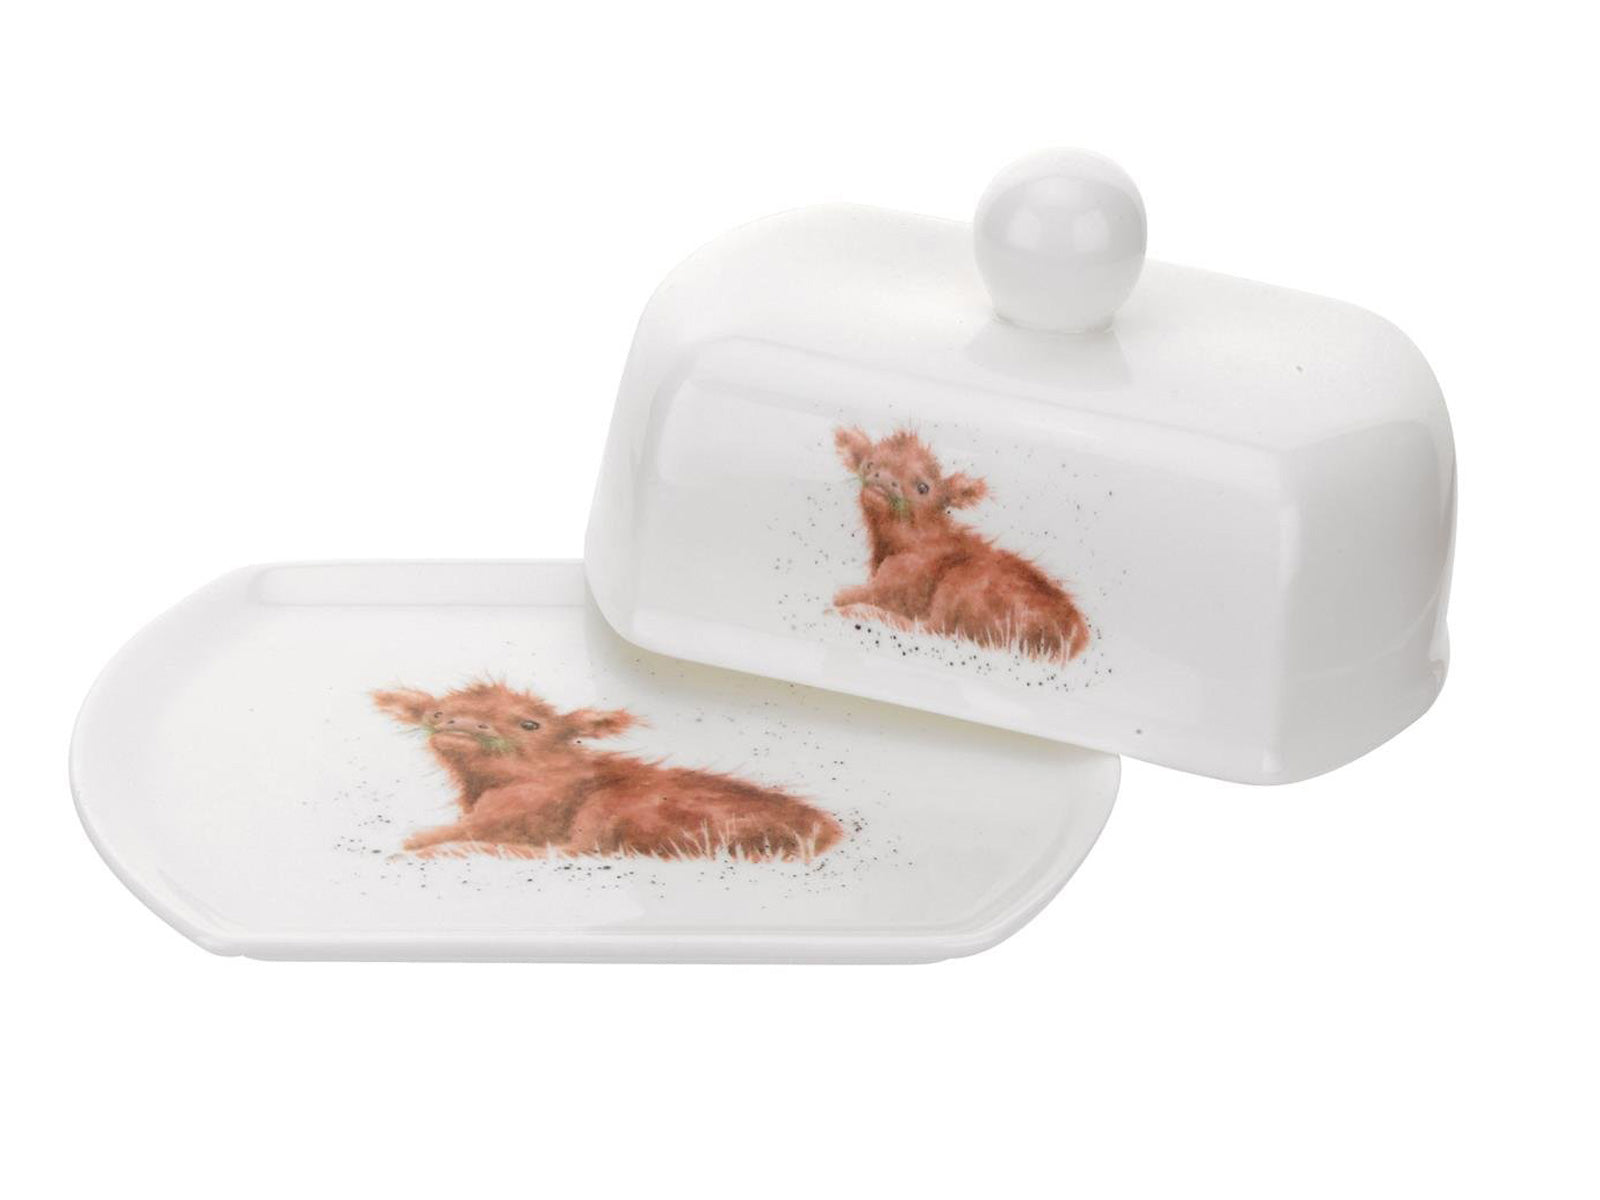 This Butter Dish is decorated with an adorable baby calf, lying on its side eating grass. With its beautiful simplistic design, it’s a perfect gift for any animal lover. Size: 155 x 110 x 80cm - 6" x 4.25" x 3.25". By: Wrendale. Product Code: WN4000-XW.